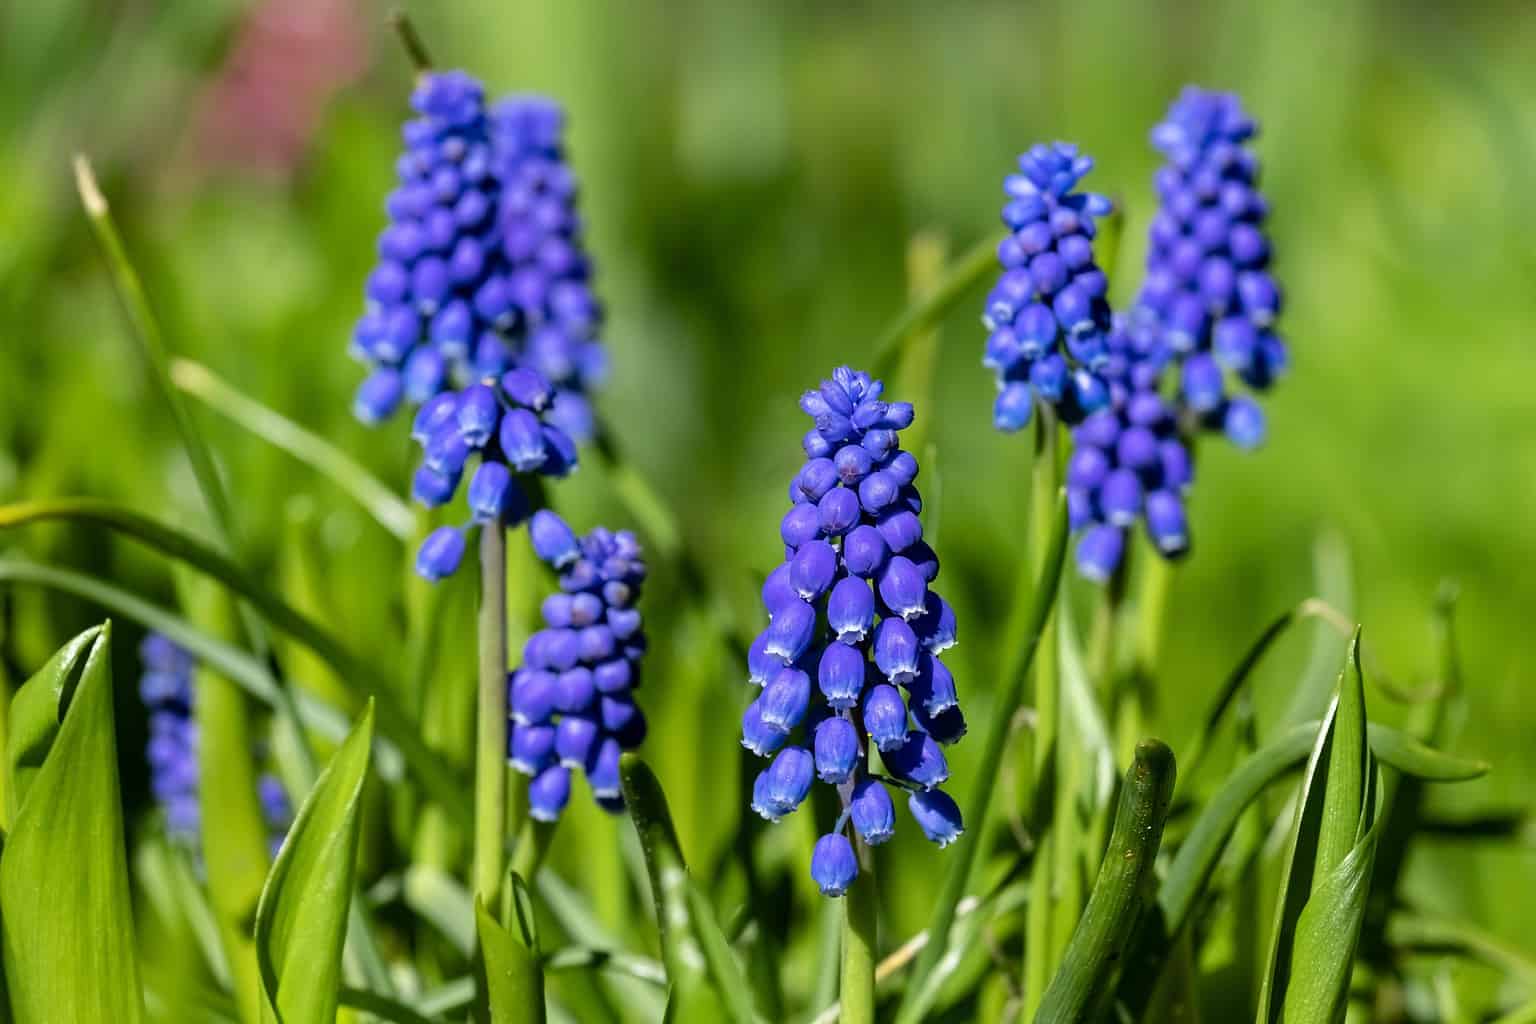 Muscari Bulbs: Varieties, How to Propagate and More